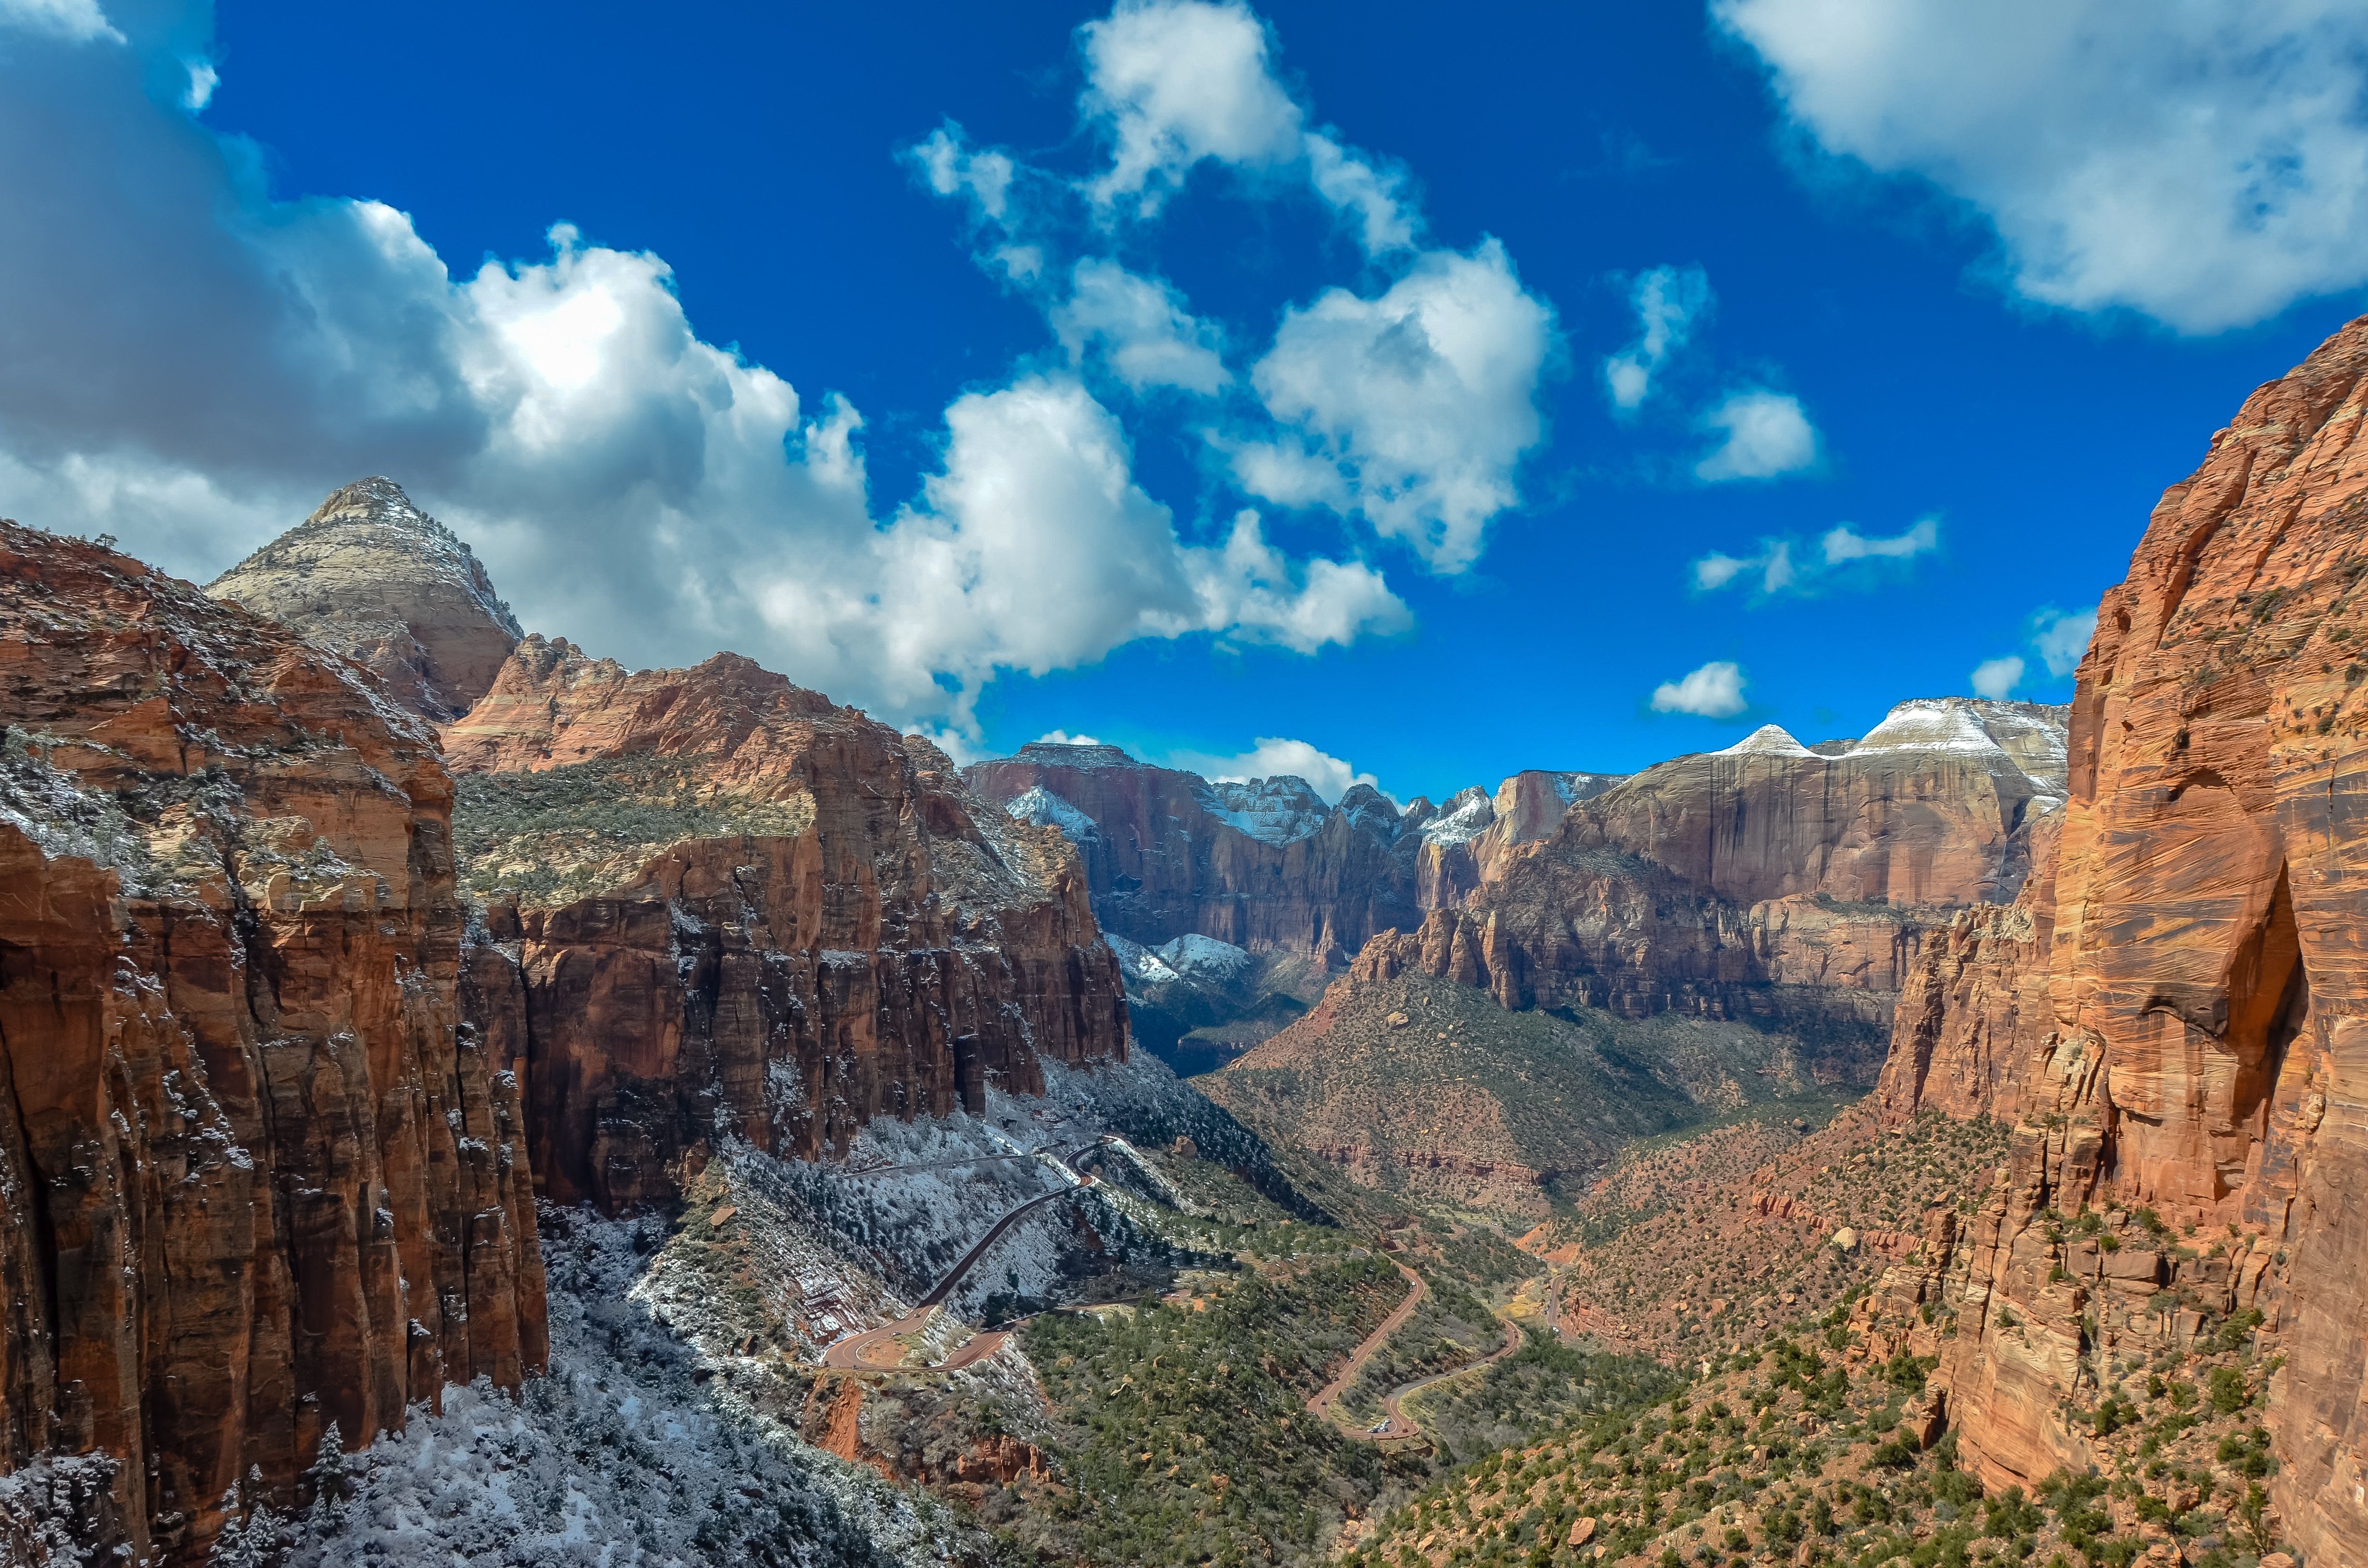 Wallpaper Canyon Overlook Trail, Zion National Park, Utah, USA, Clouds, 4K, Nature,. Wallpaper for iPhone, Android, Mobile and Desktop